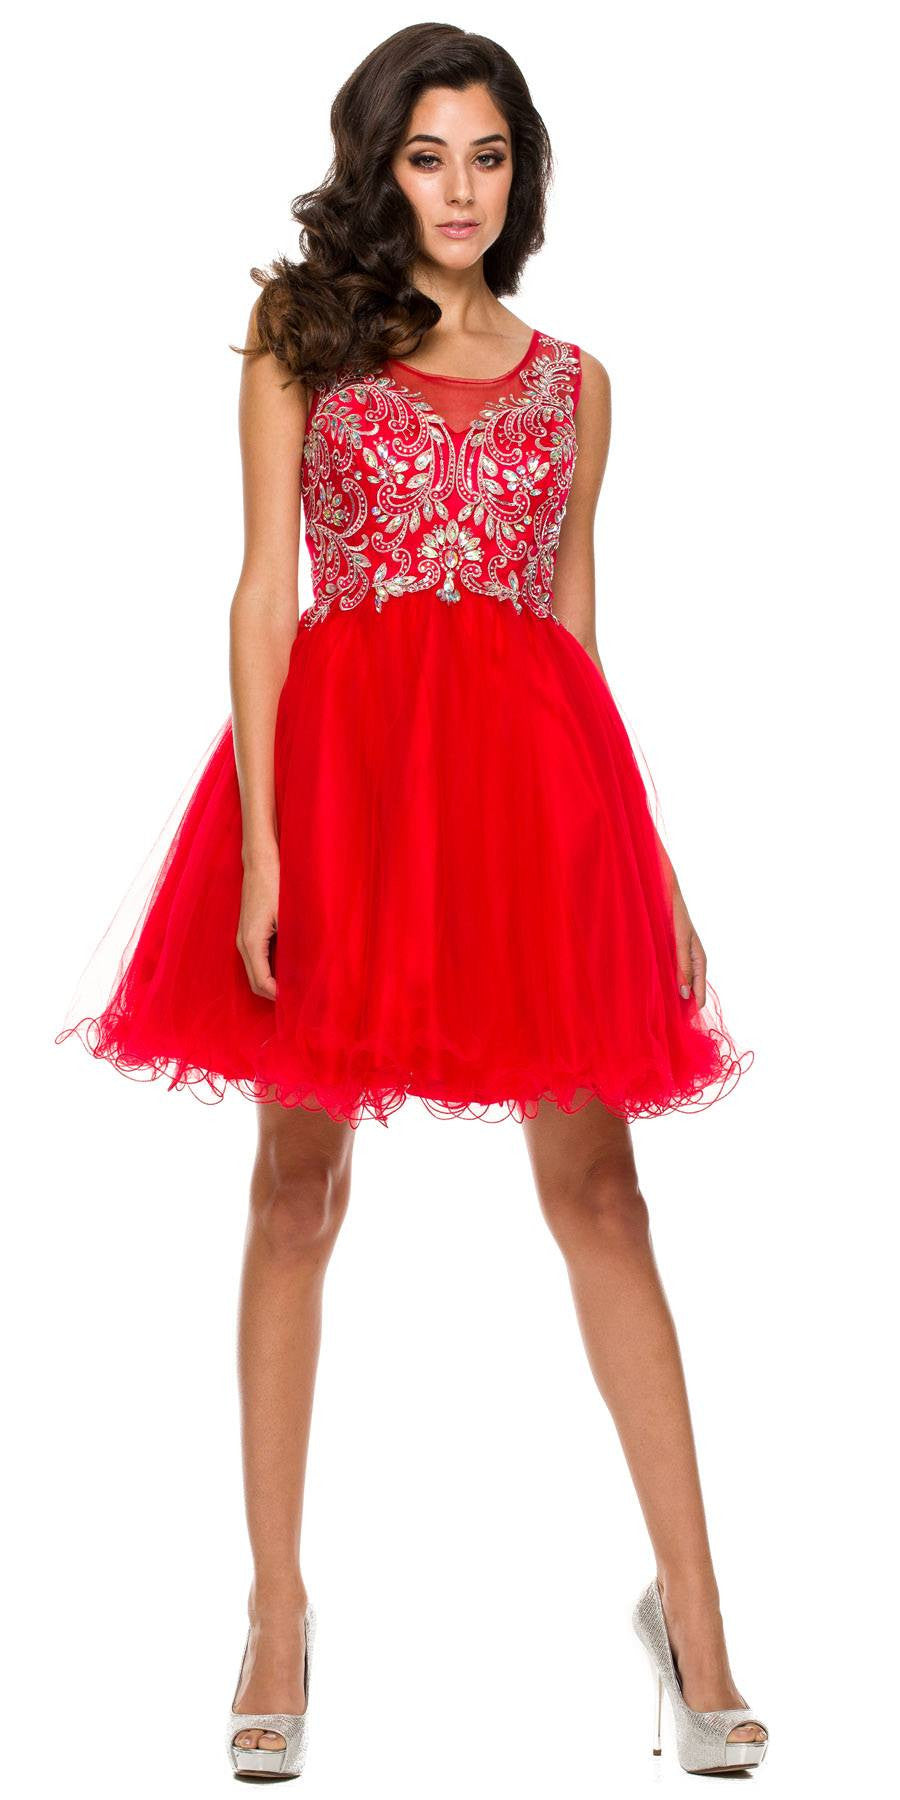 Poofy A Line Red Short Homecoming Dress Tulle Embroidery